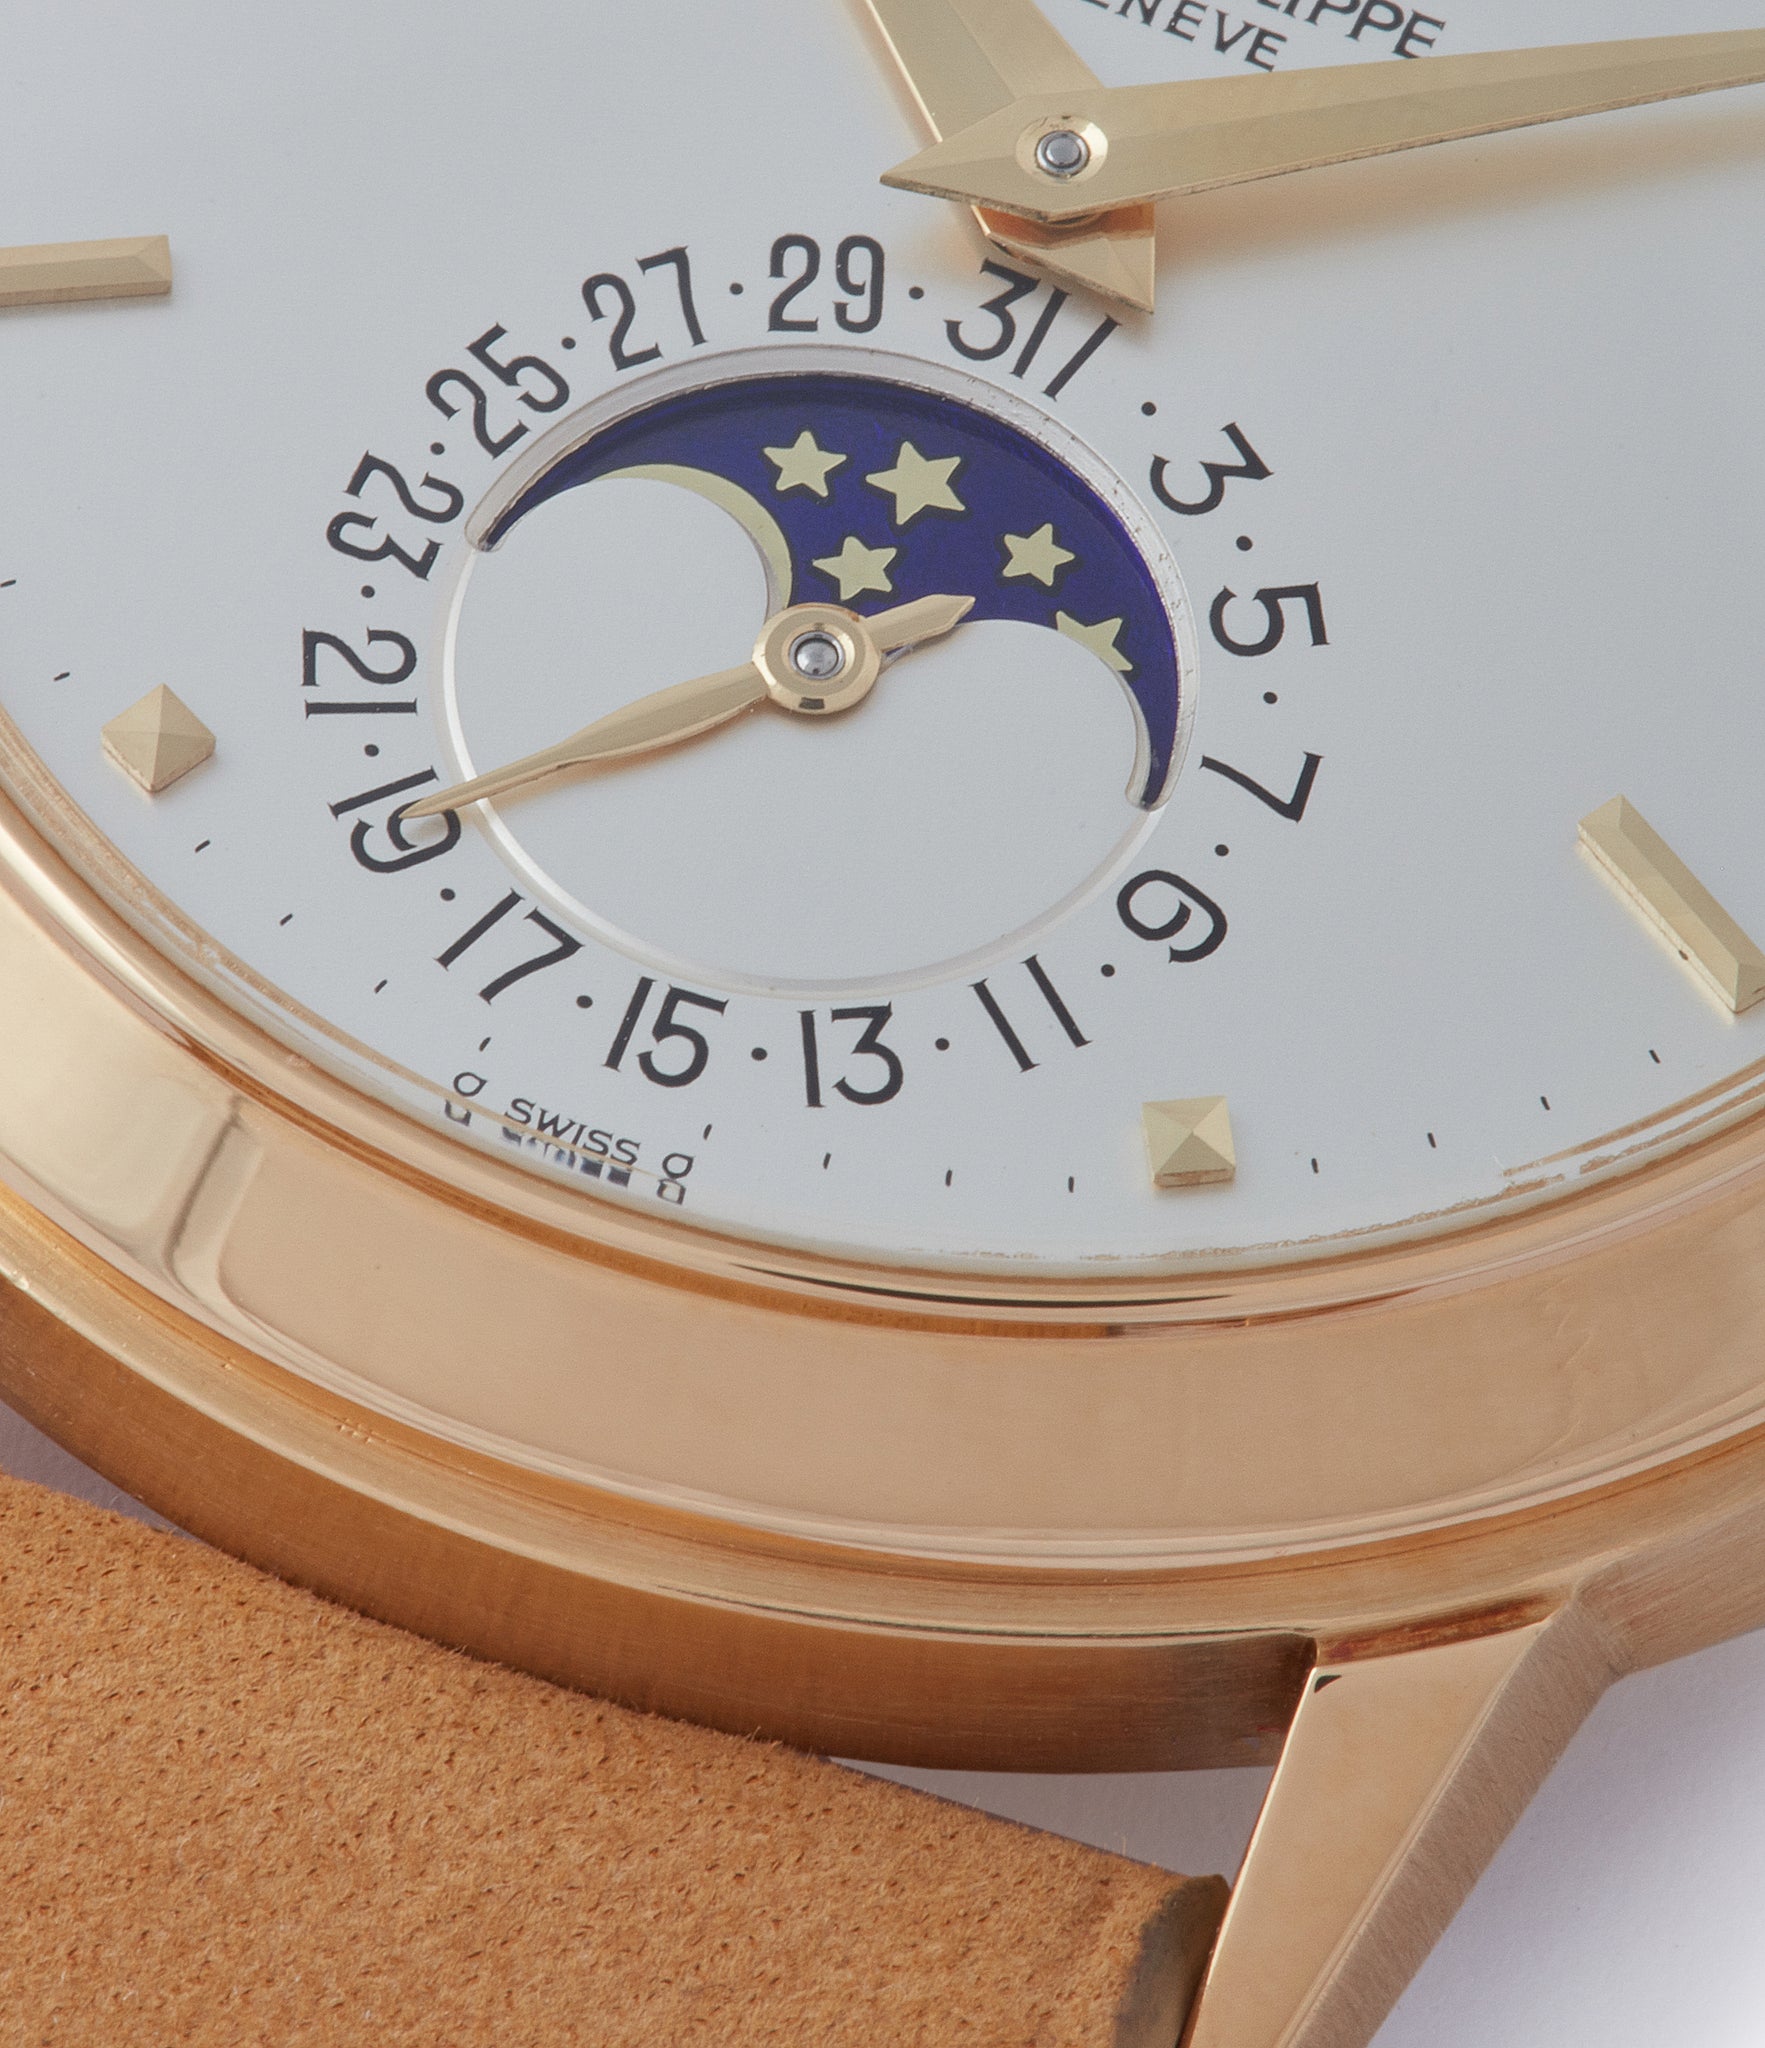 moonphase Patek Philippe 3448 Perpetual Calendar Moonphase yellow gold dress watch for sale online at A Collected Man London UK specialist of rare watches